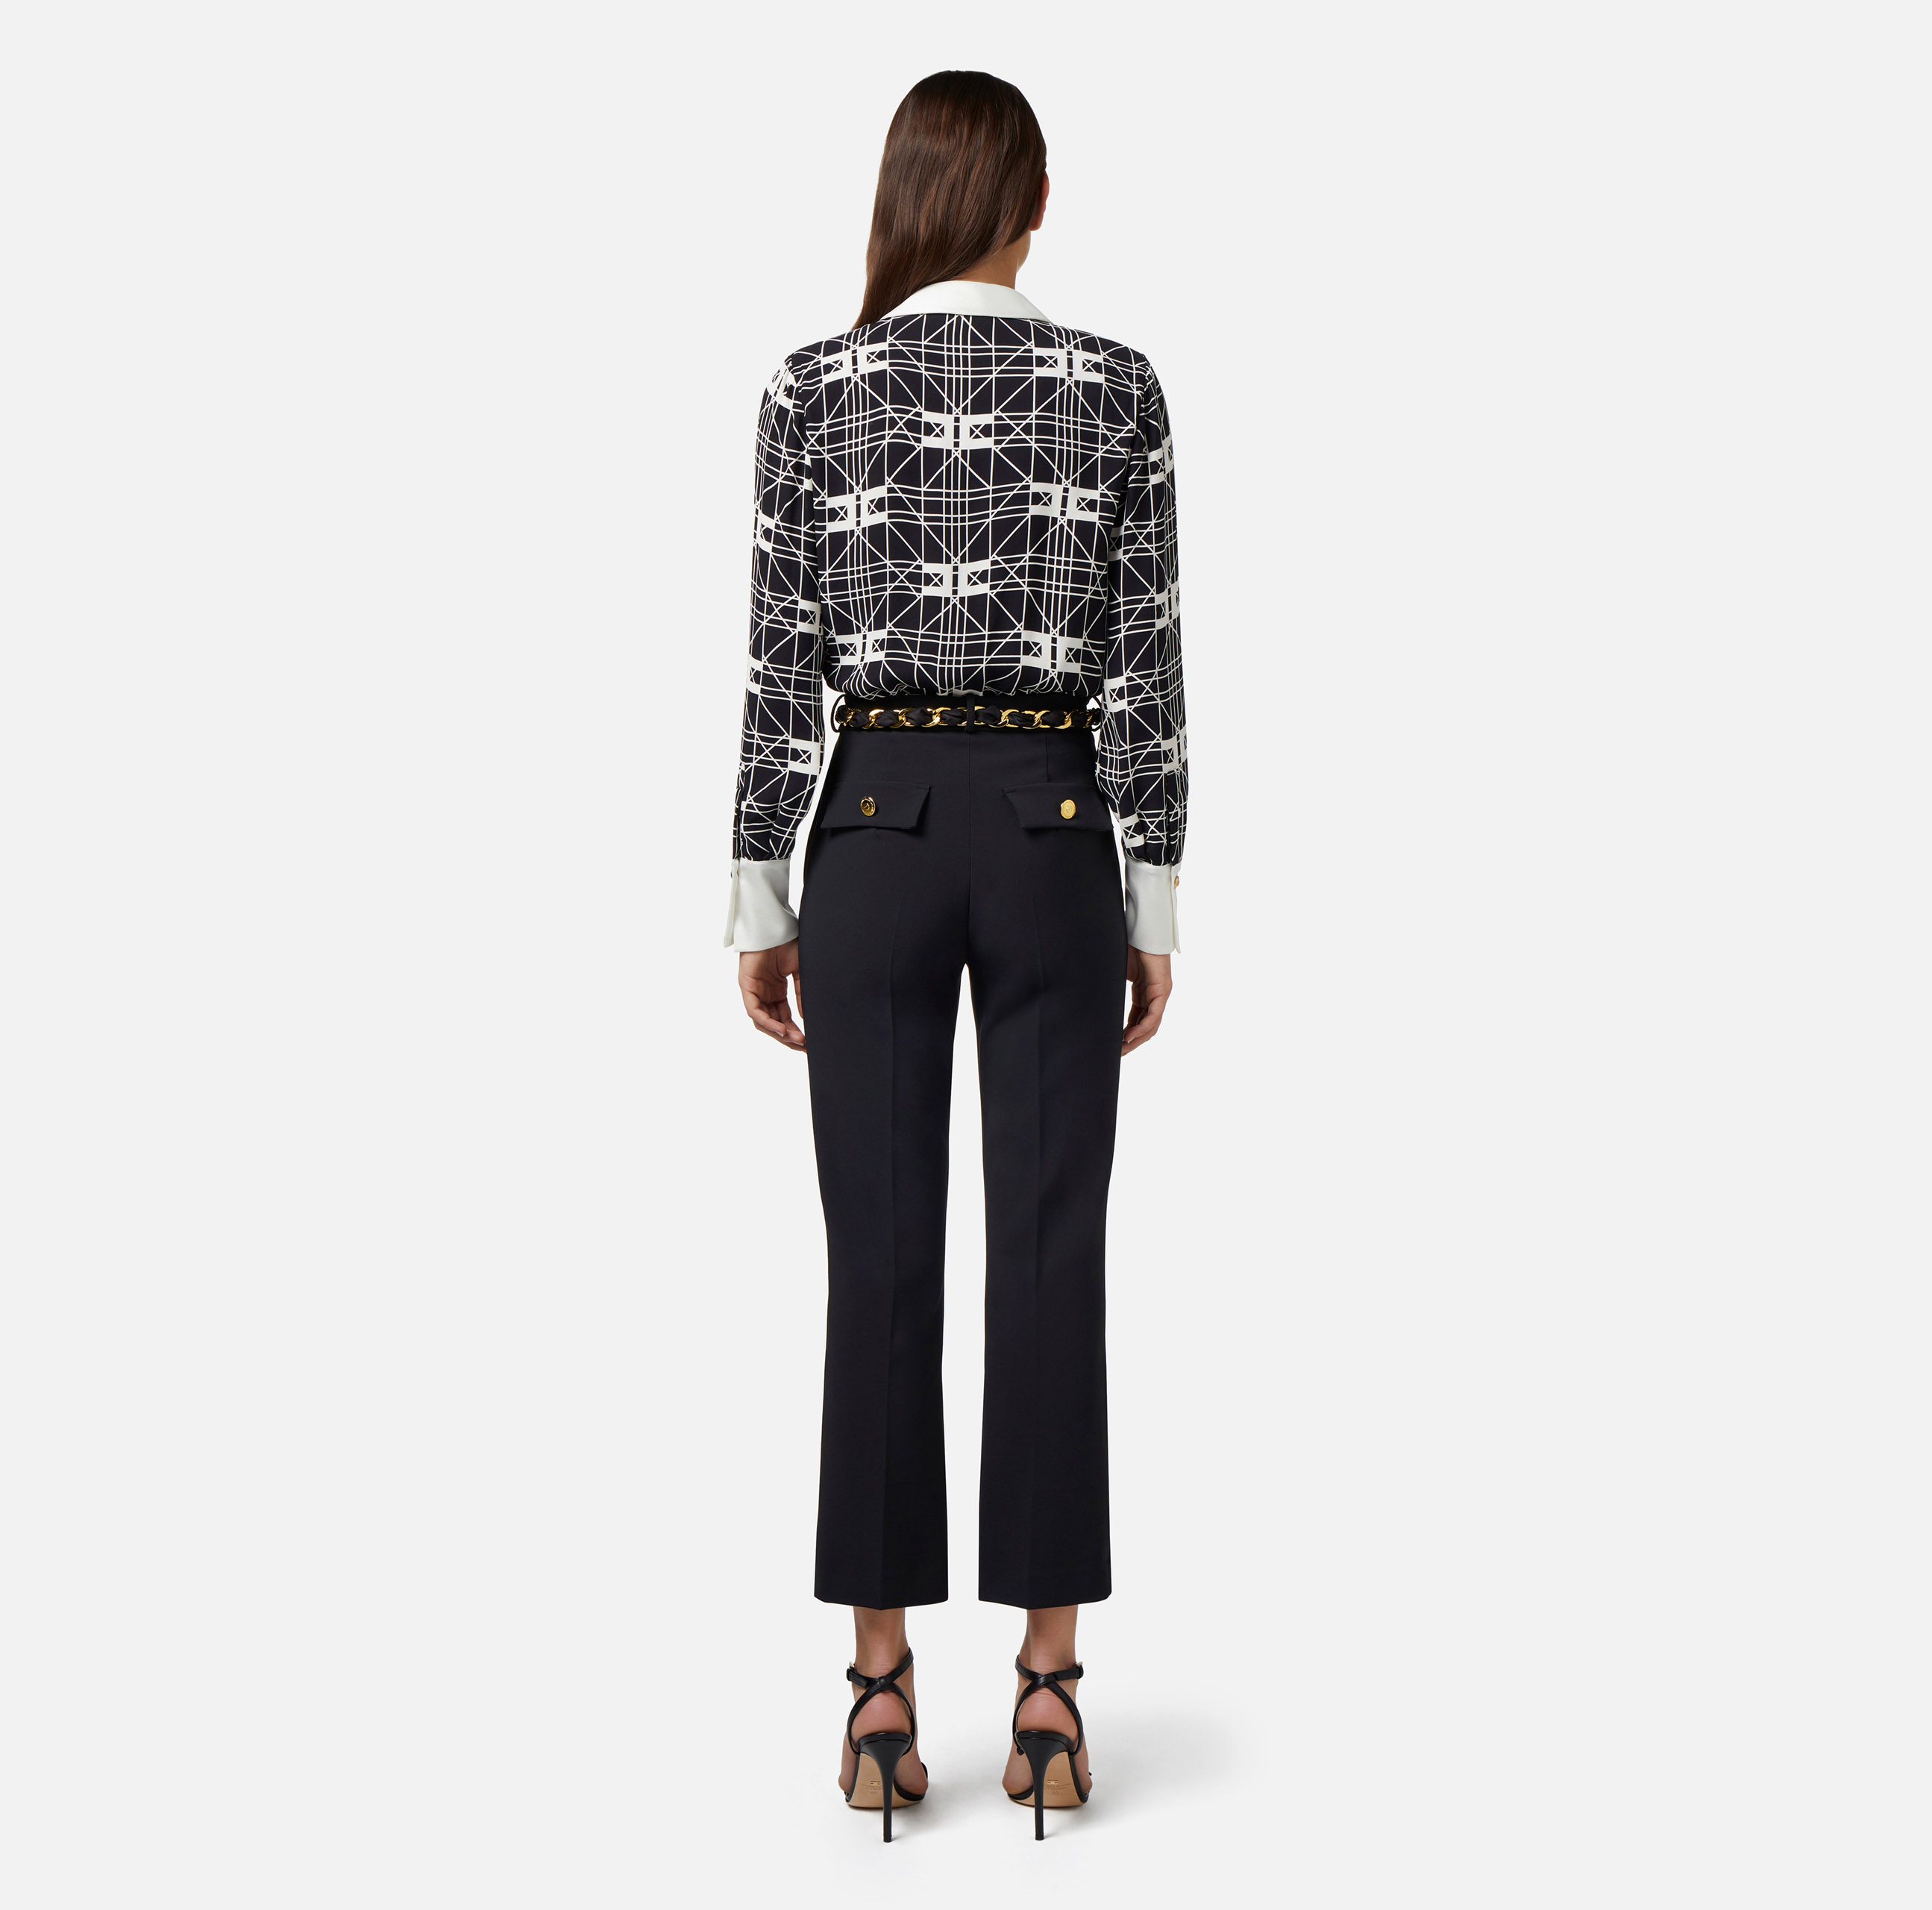 Crossover bodysuit-style blouse in printed viscose georgette fabric - Elisabetta Franchi